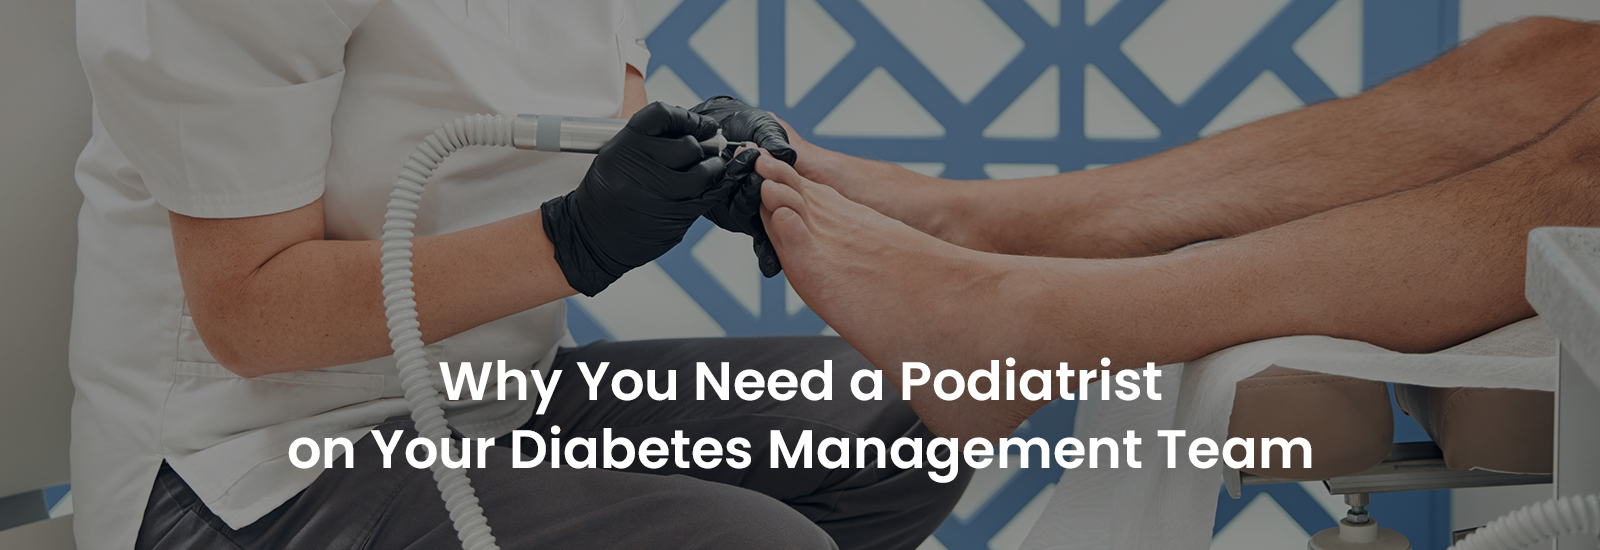 Why You Need a Podiatrist on Your Diabetes Management Team | Banner Image